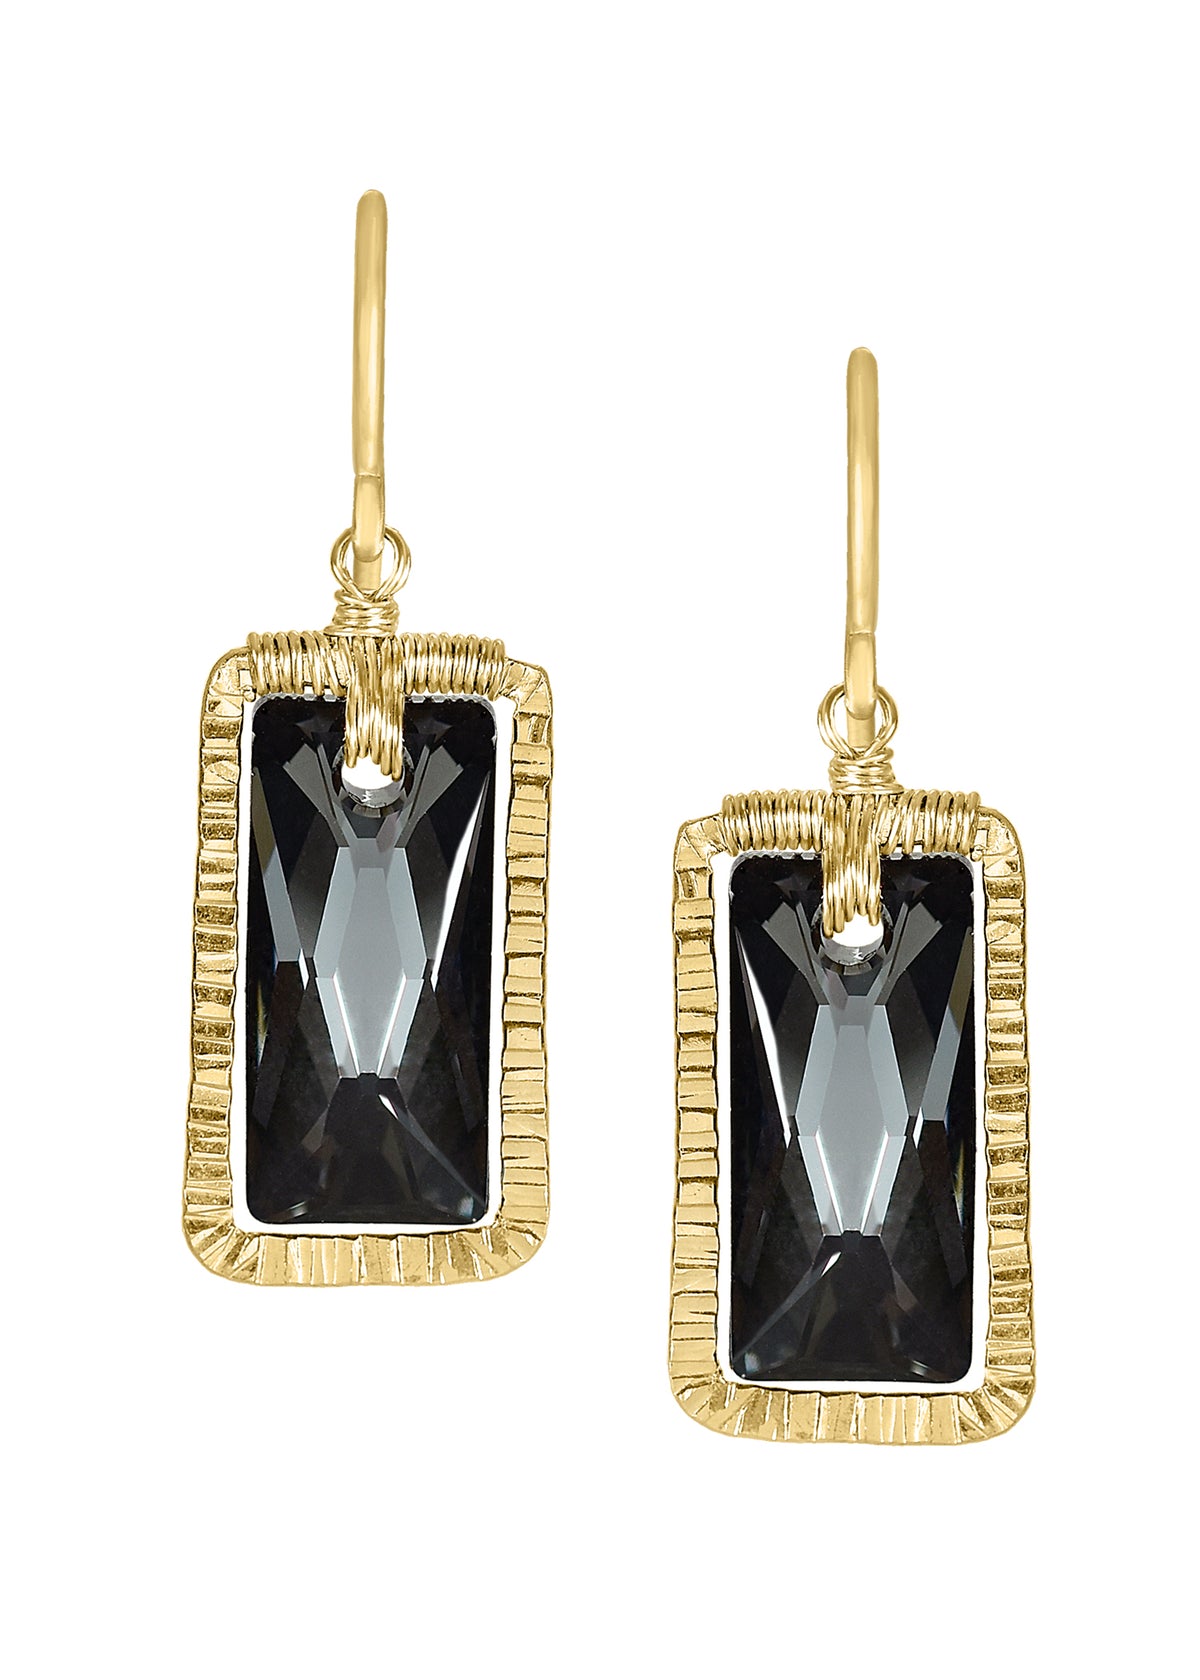 Crystal 14k gold fill Earrings measure 1-1/8&quot; in length (including the ear wires) and 3/8&quot; in width Handmade in our Los Angeles studio